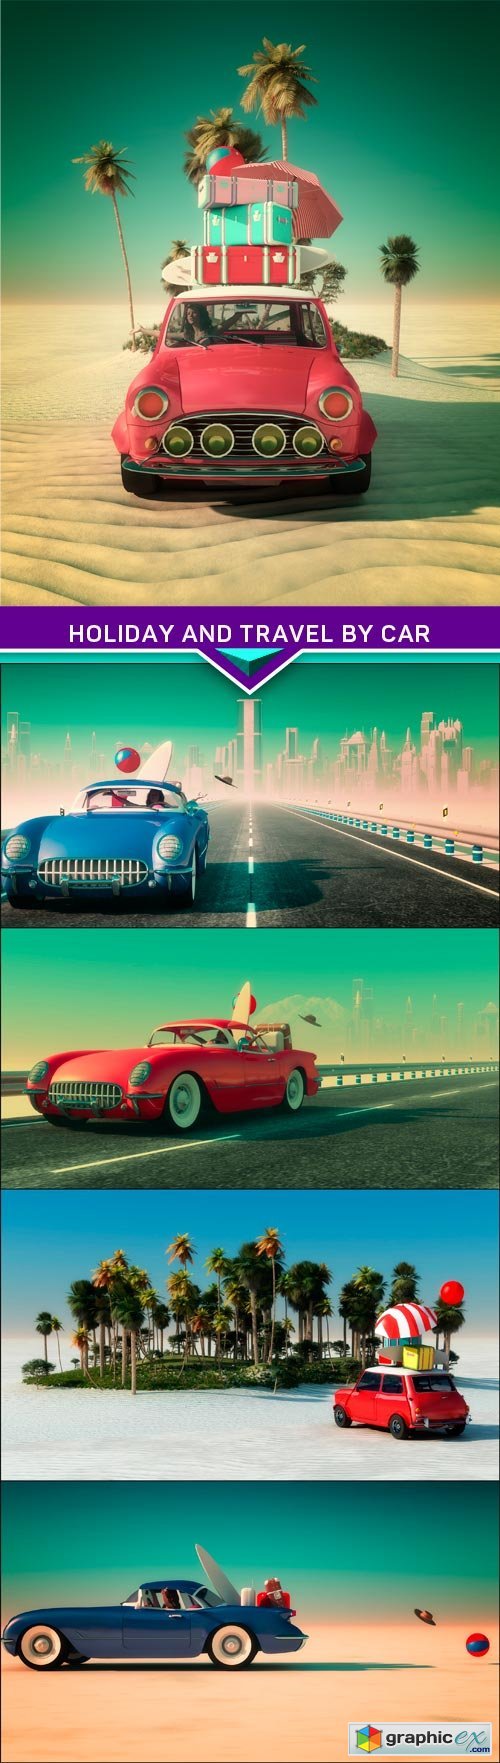 Holiday and travel by car 5x JPEG